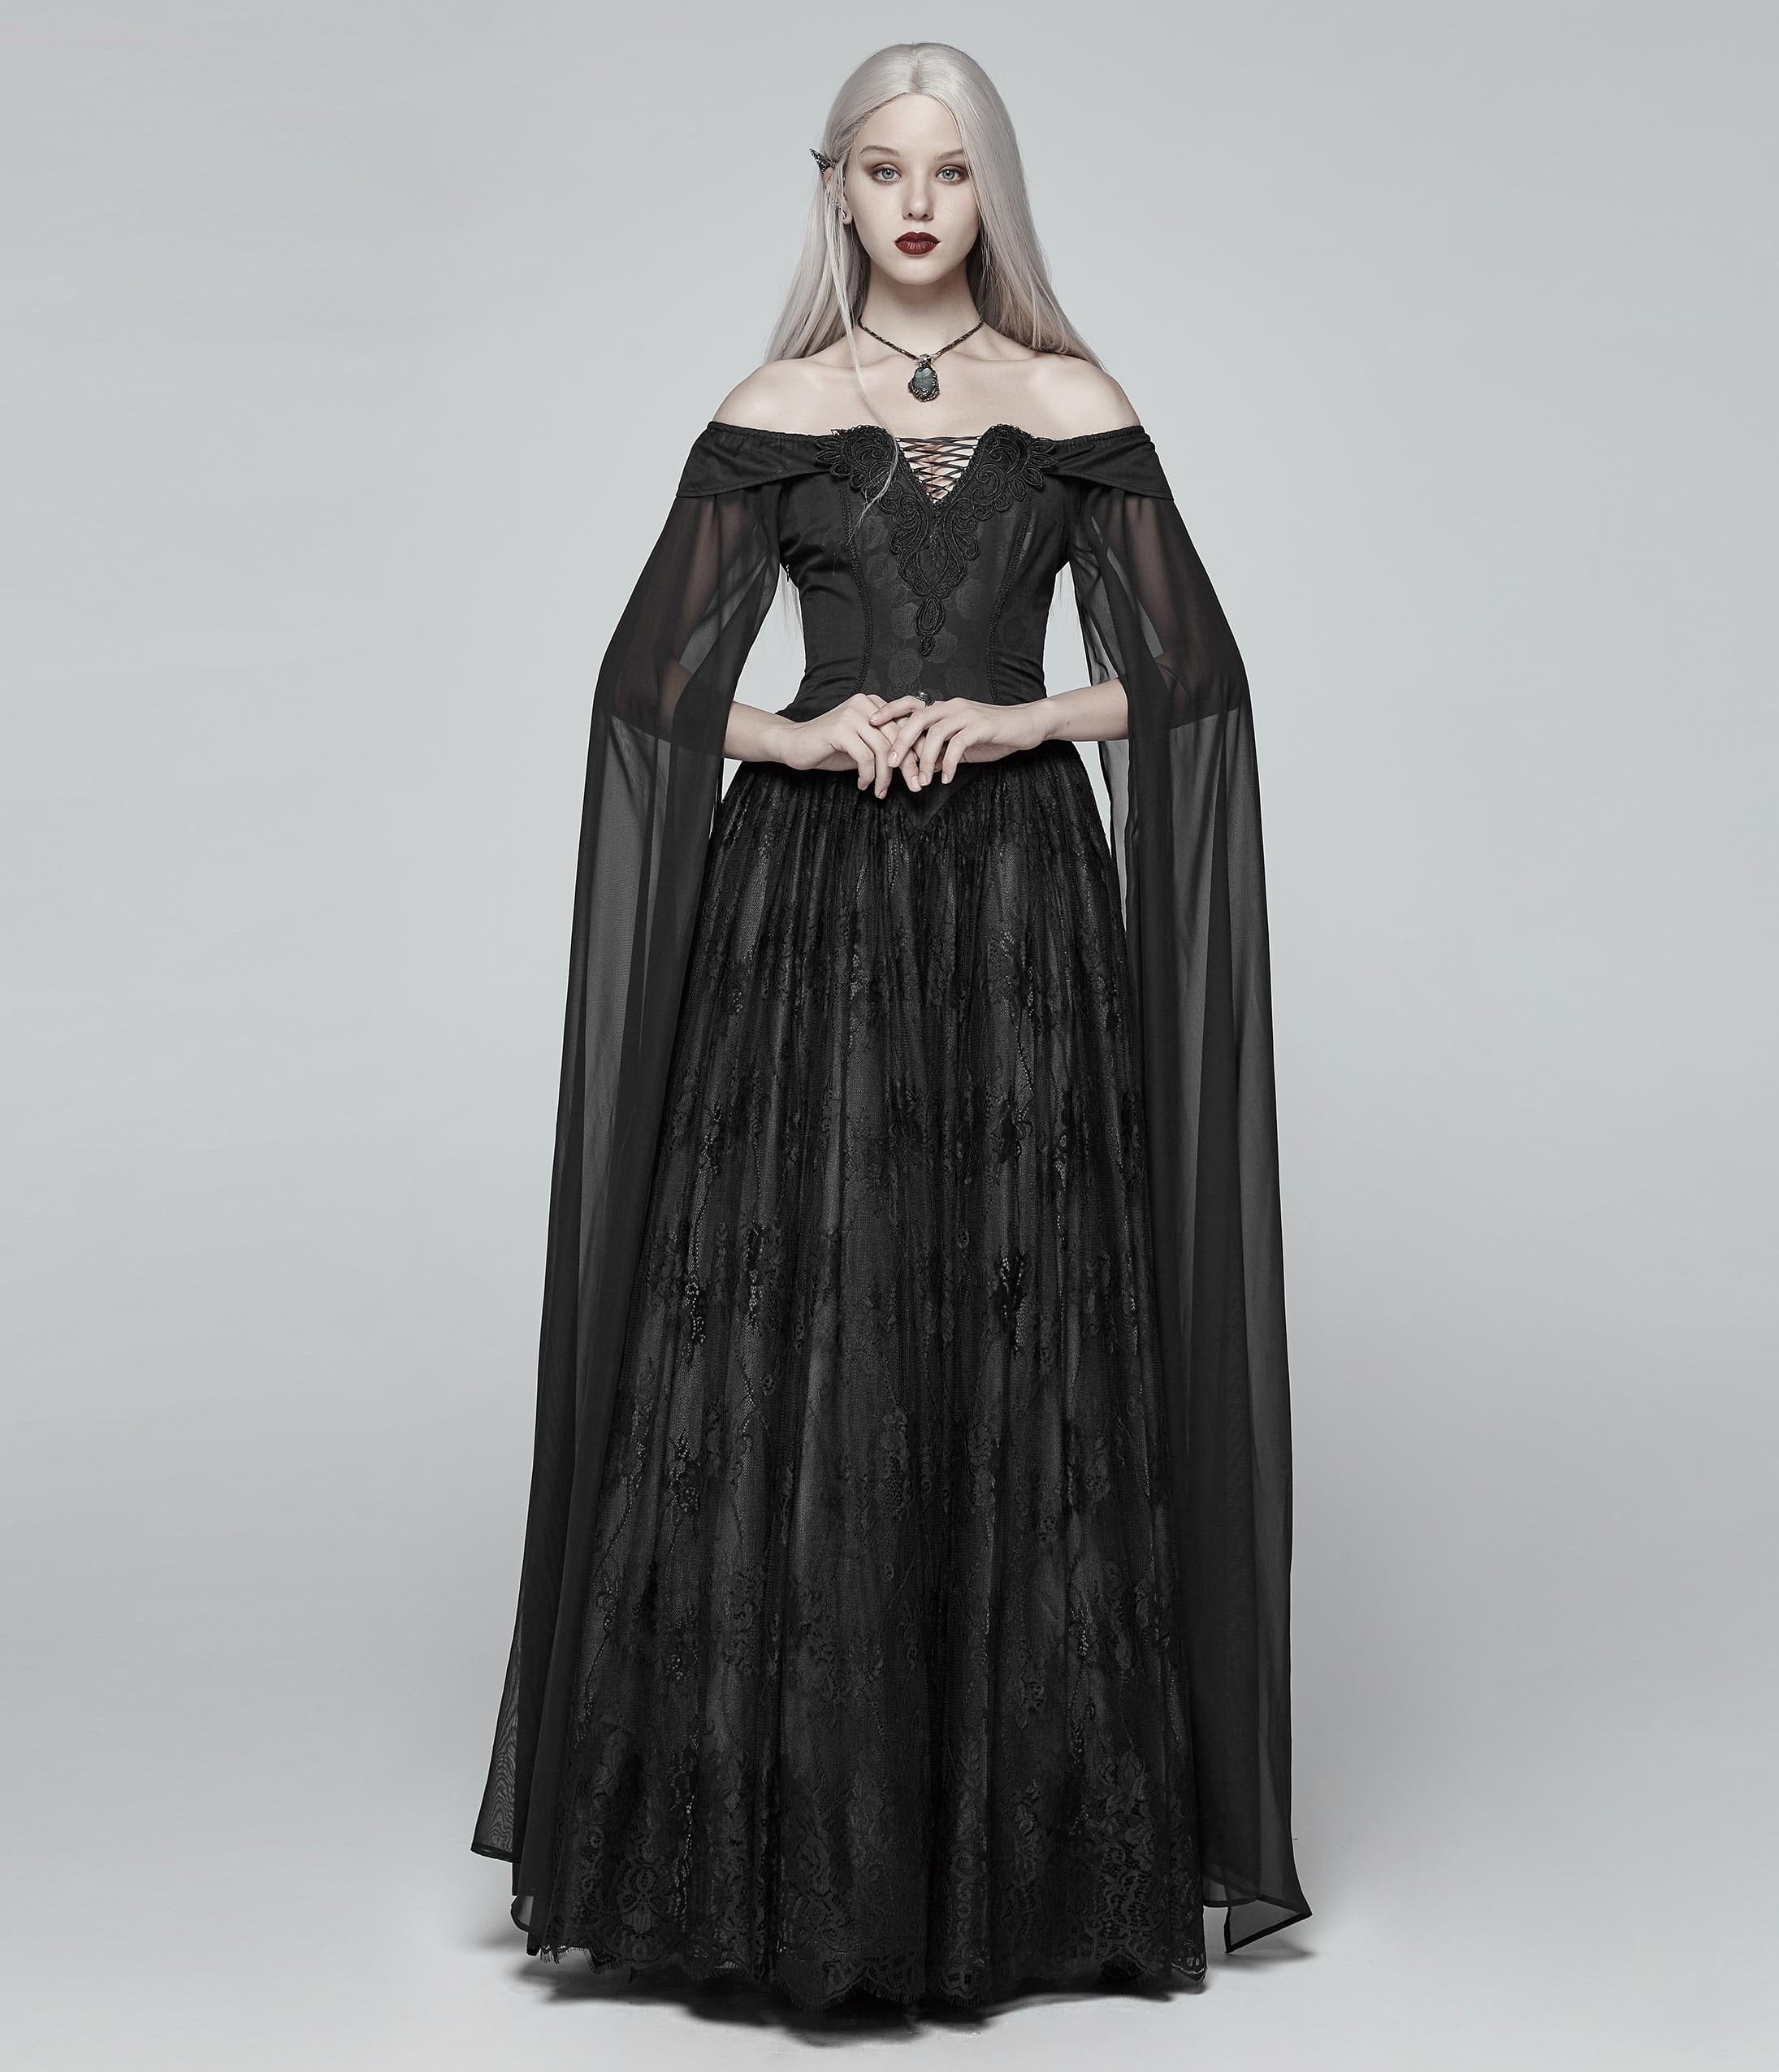 

Vintage Style Black Gothic Victorian Long Gown